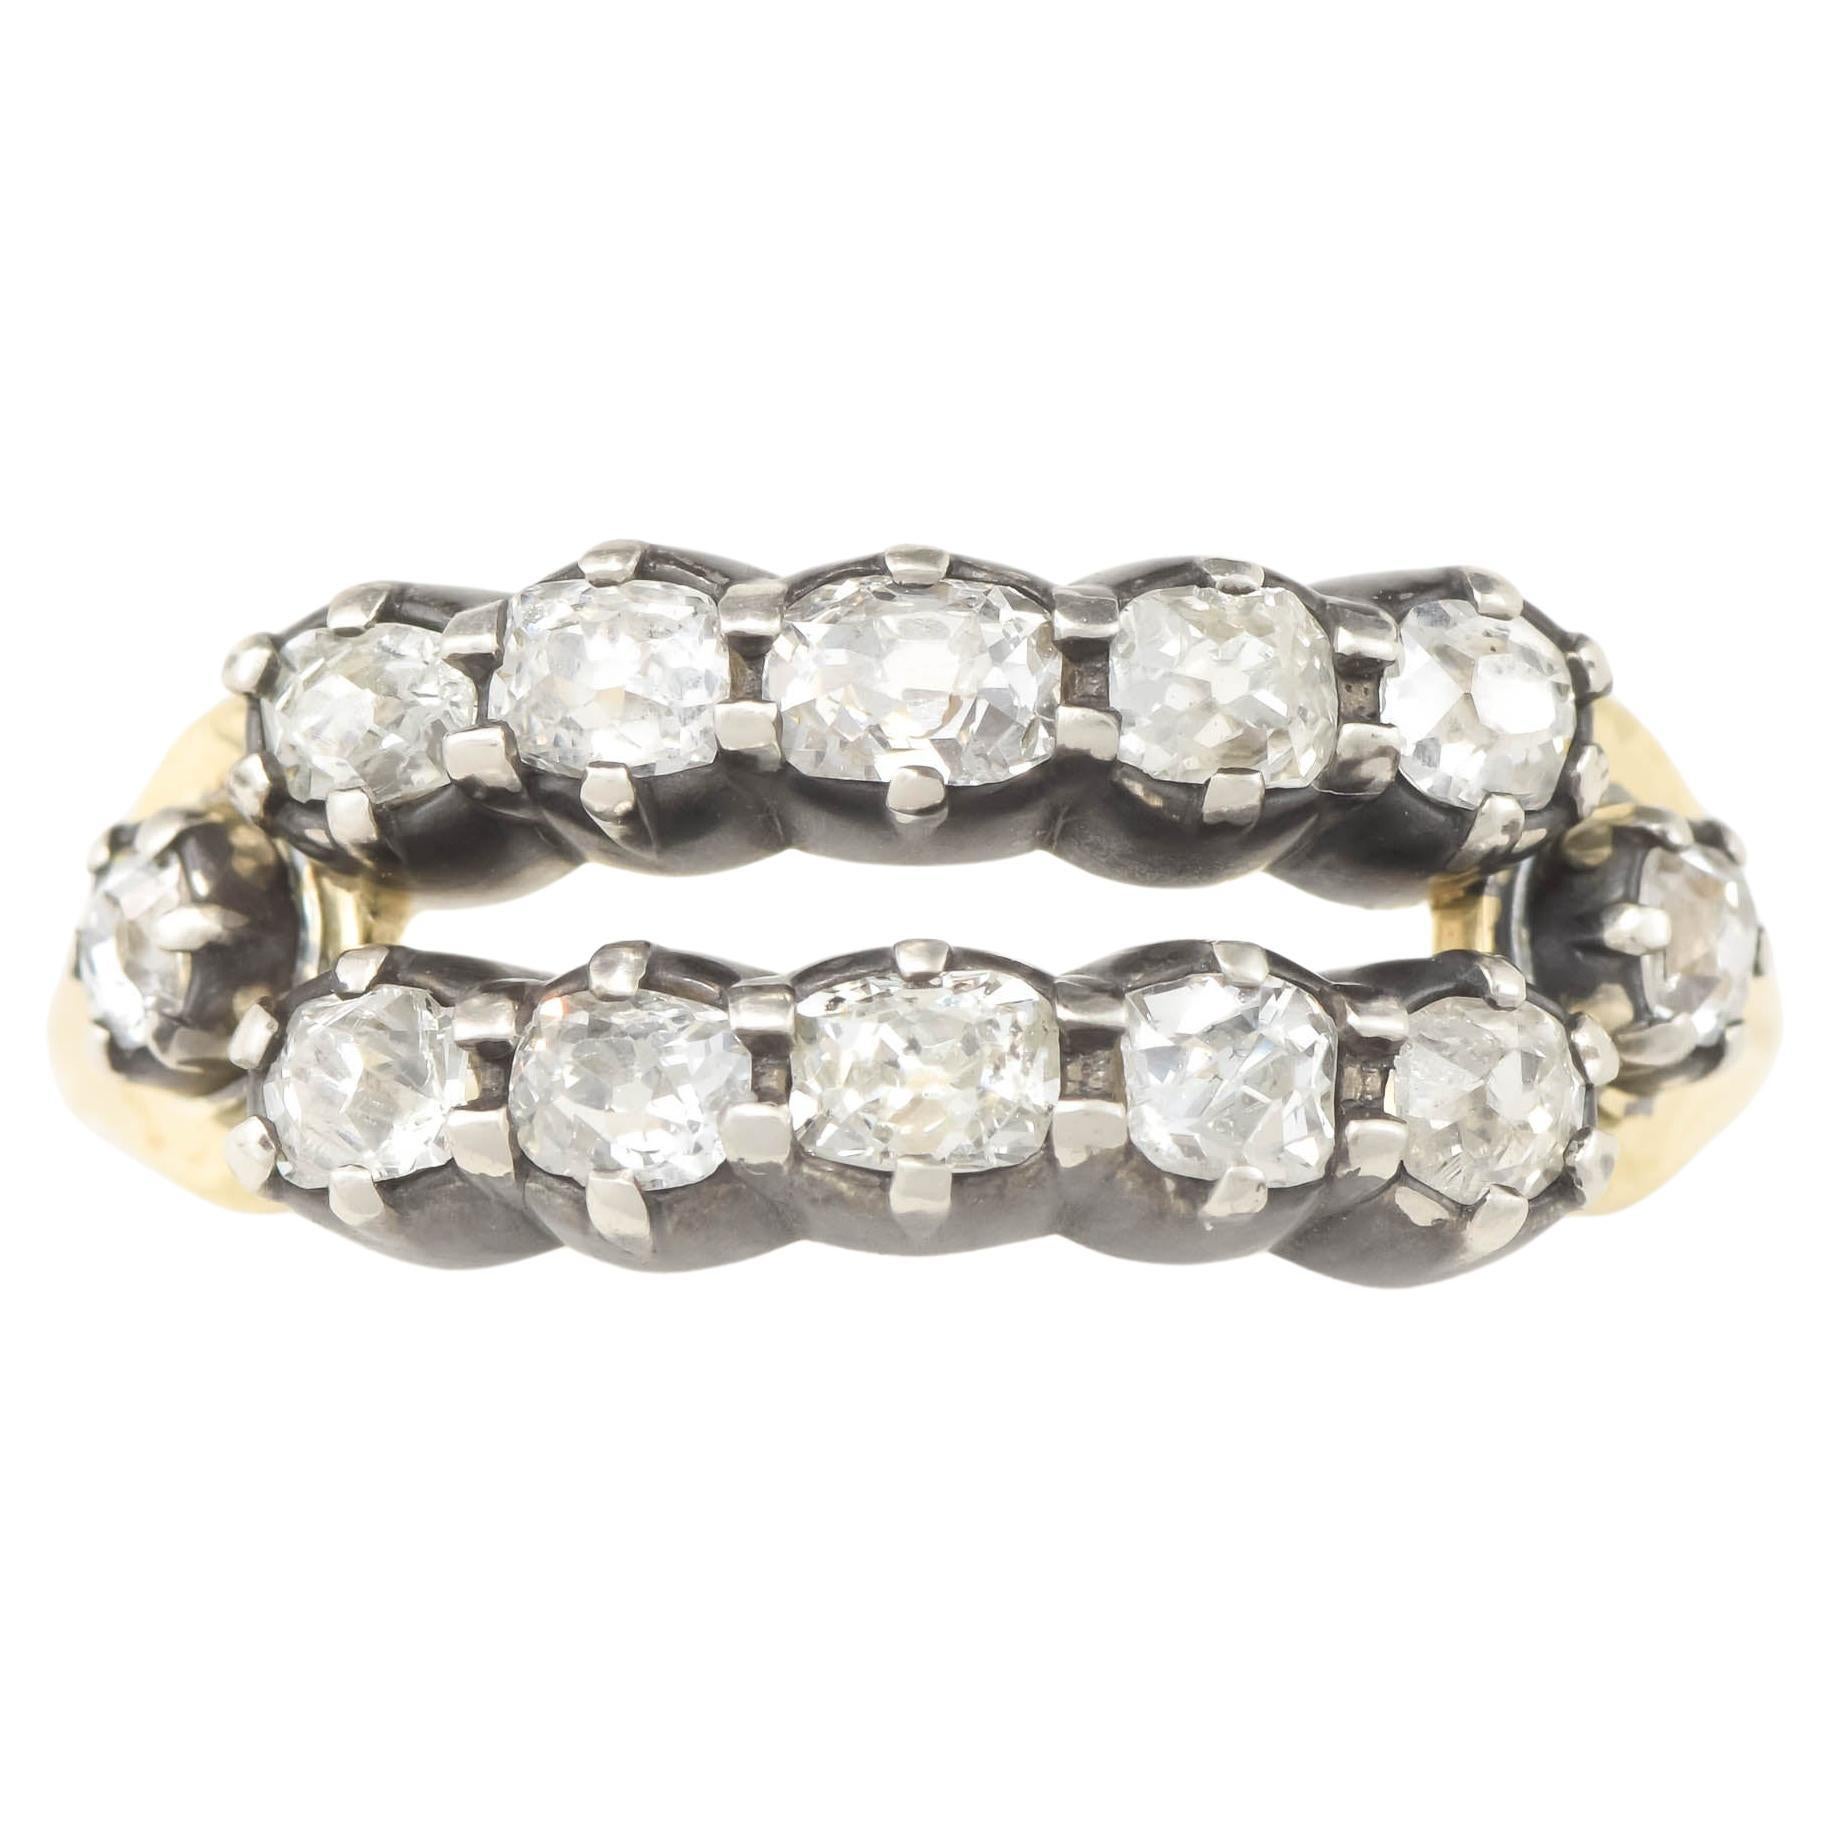 Double Row Ring with Antique Diamonds - Wedding, Anniversary or Stacking Band For Sale